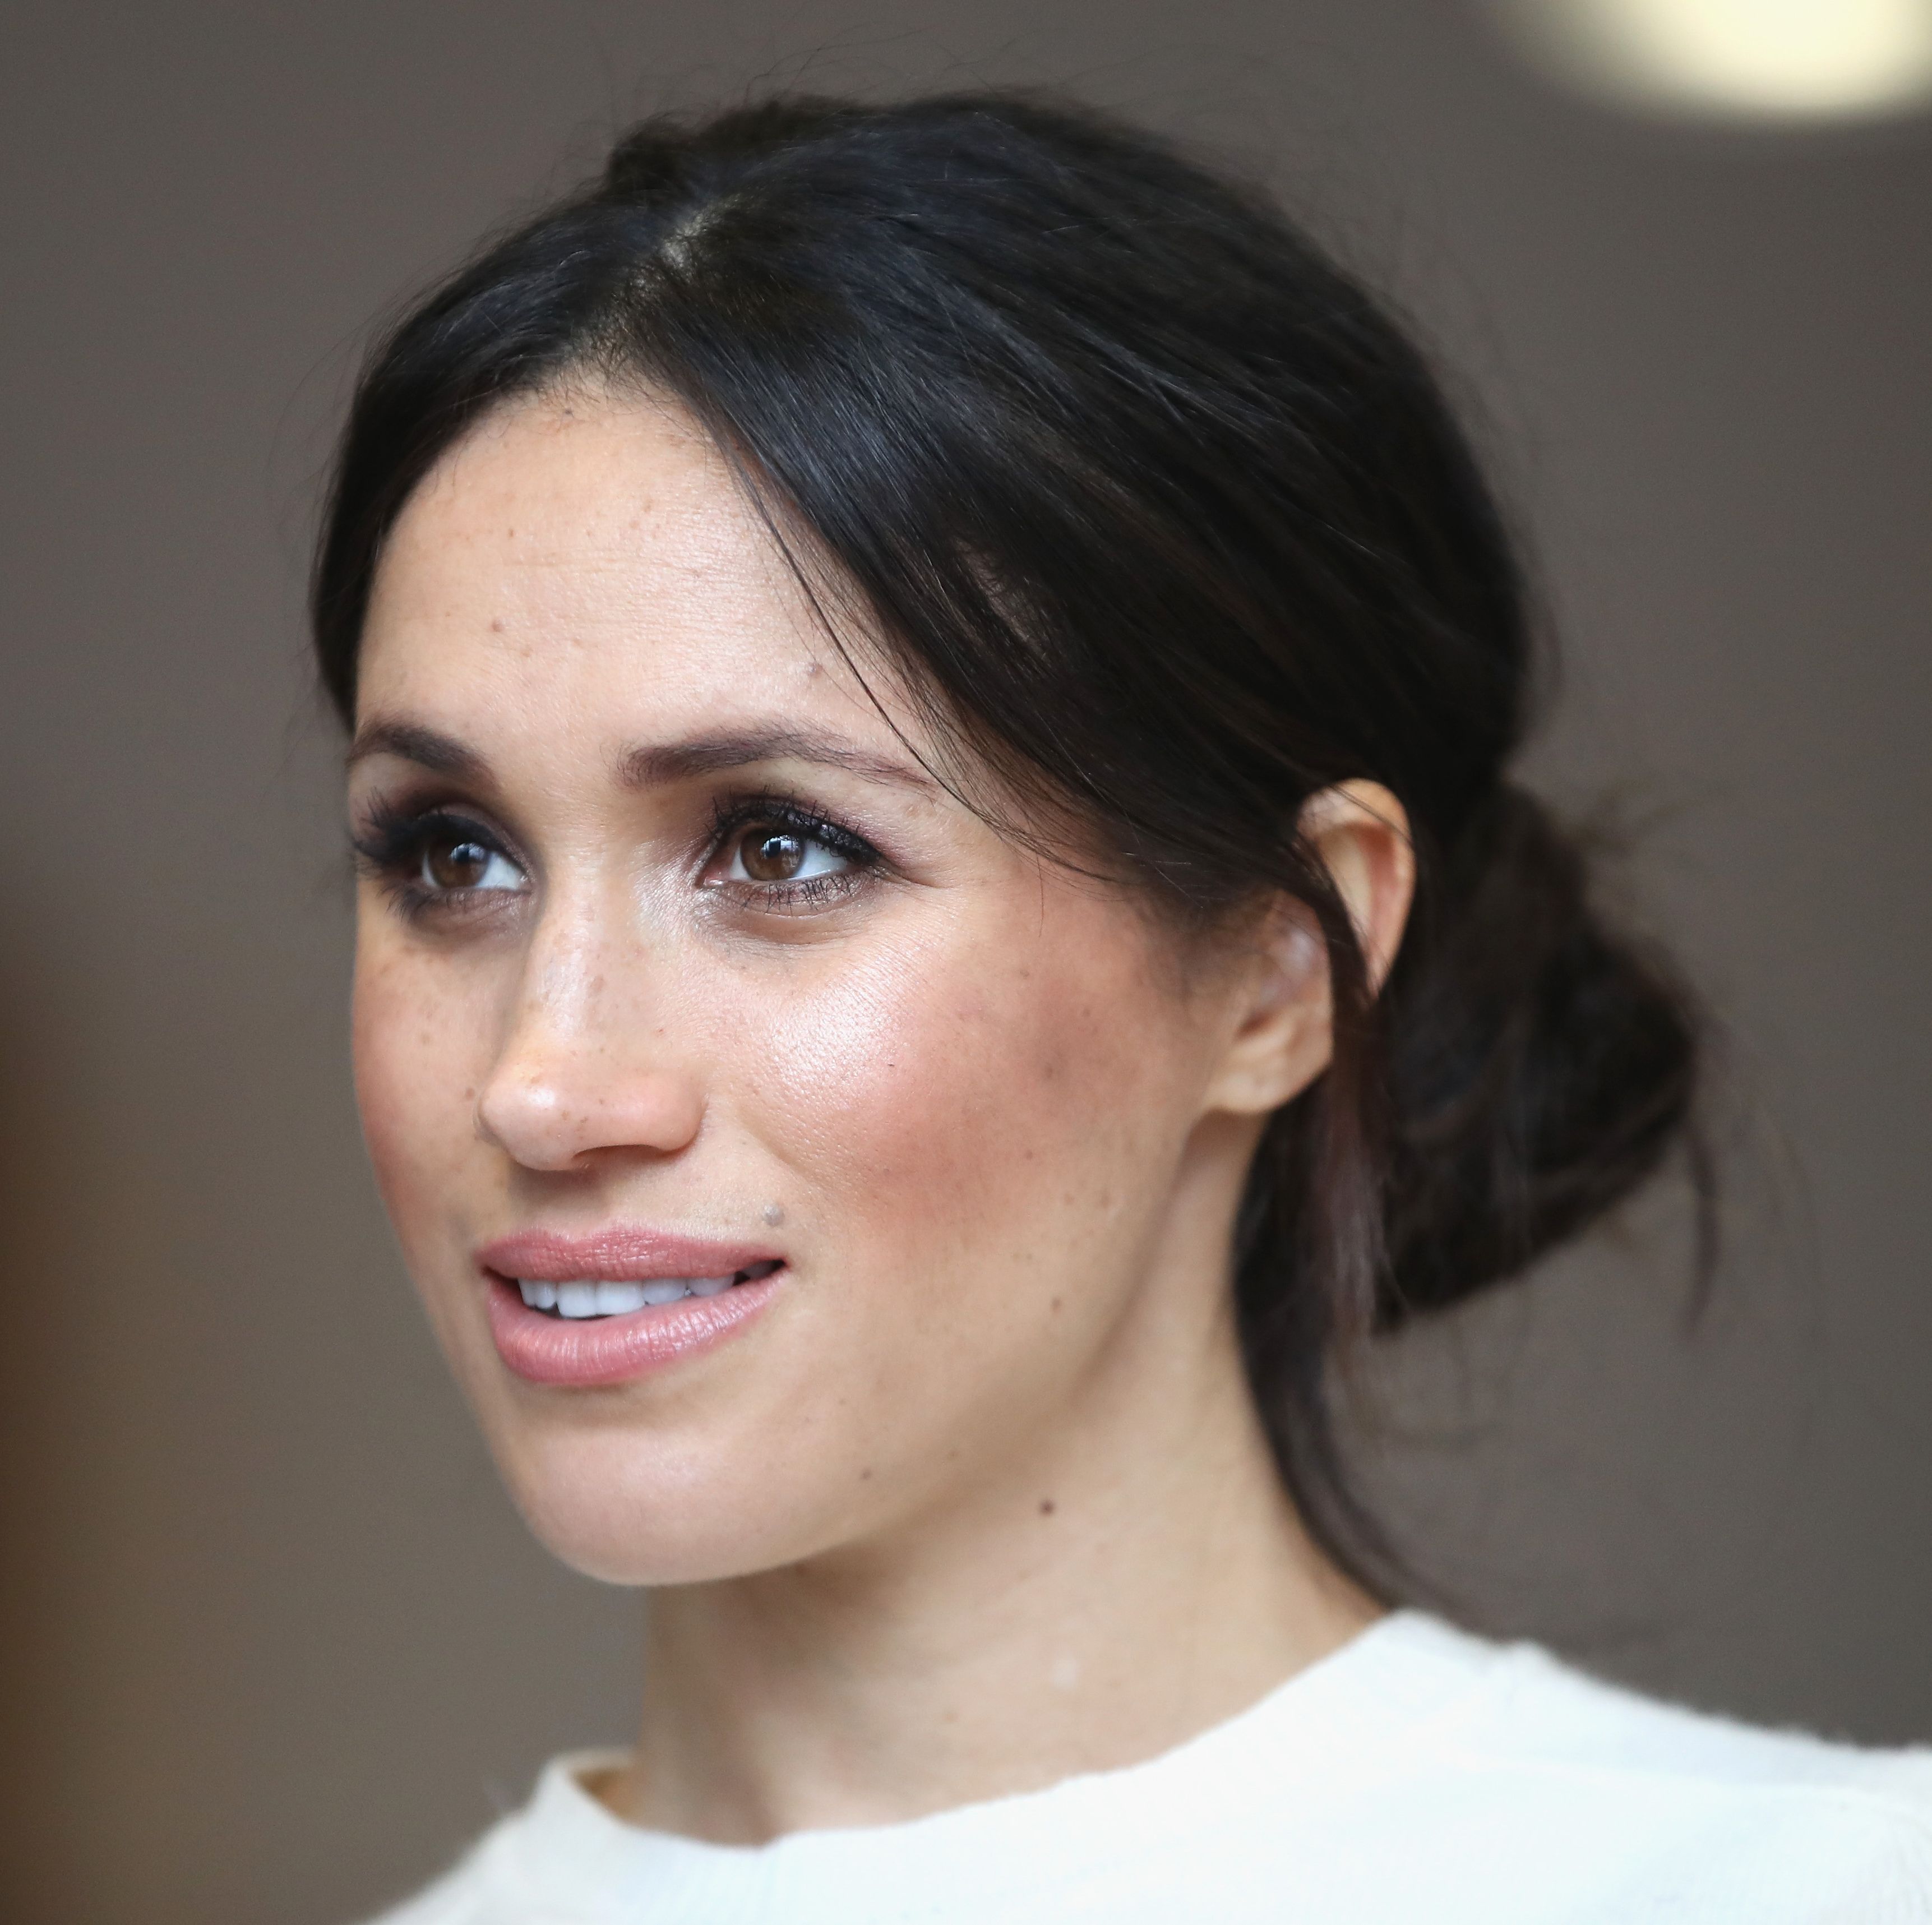 Meghan Markle Opens Up About the Queen's Passing and Supporting Prince Harry